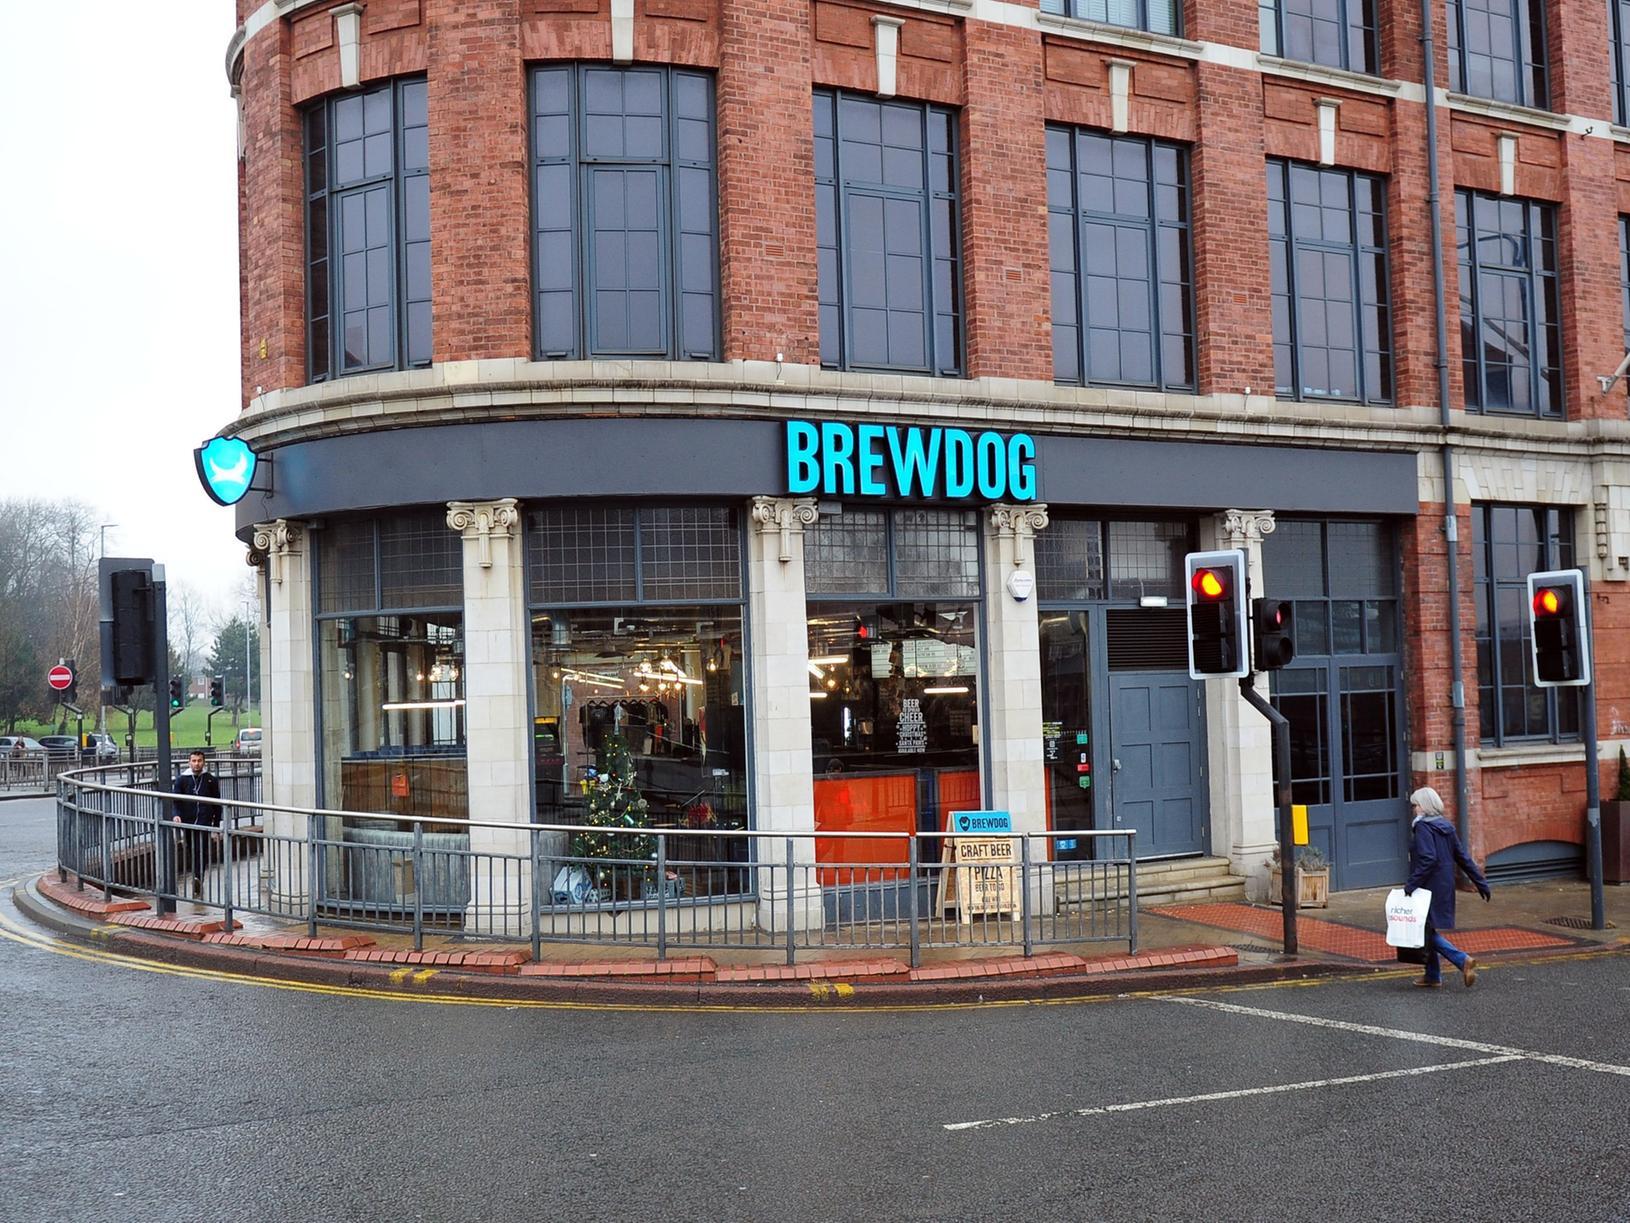 The Brewdog on tucked away behind the Corn Exchange bagged the fourth spot on the list. It also has another bar at the top of town (pictured).